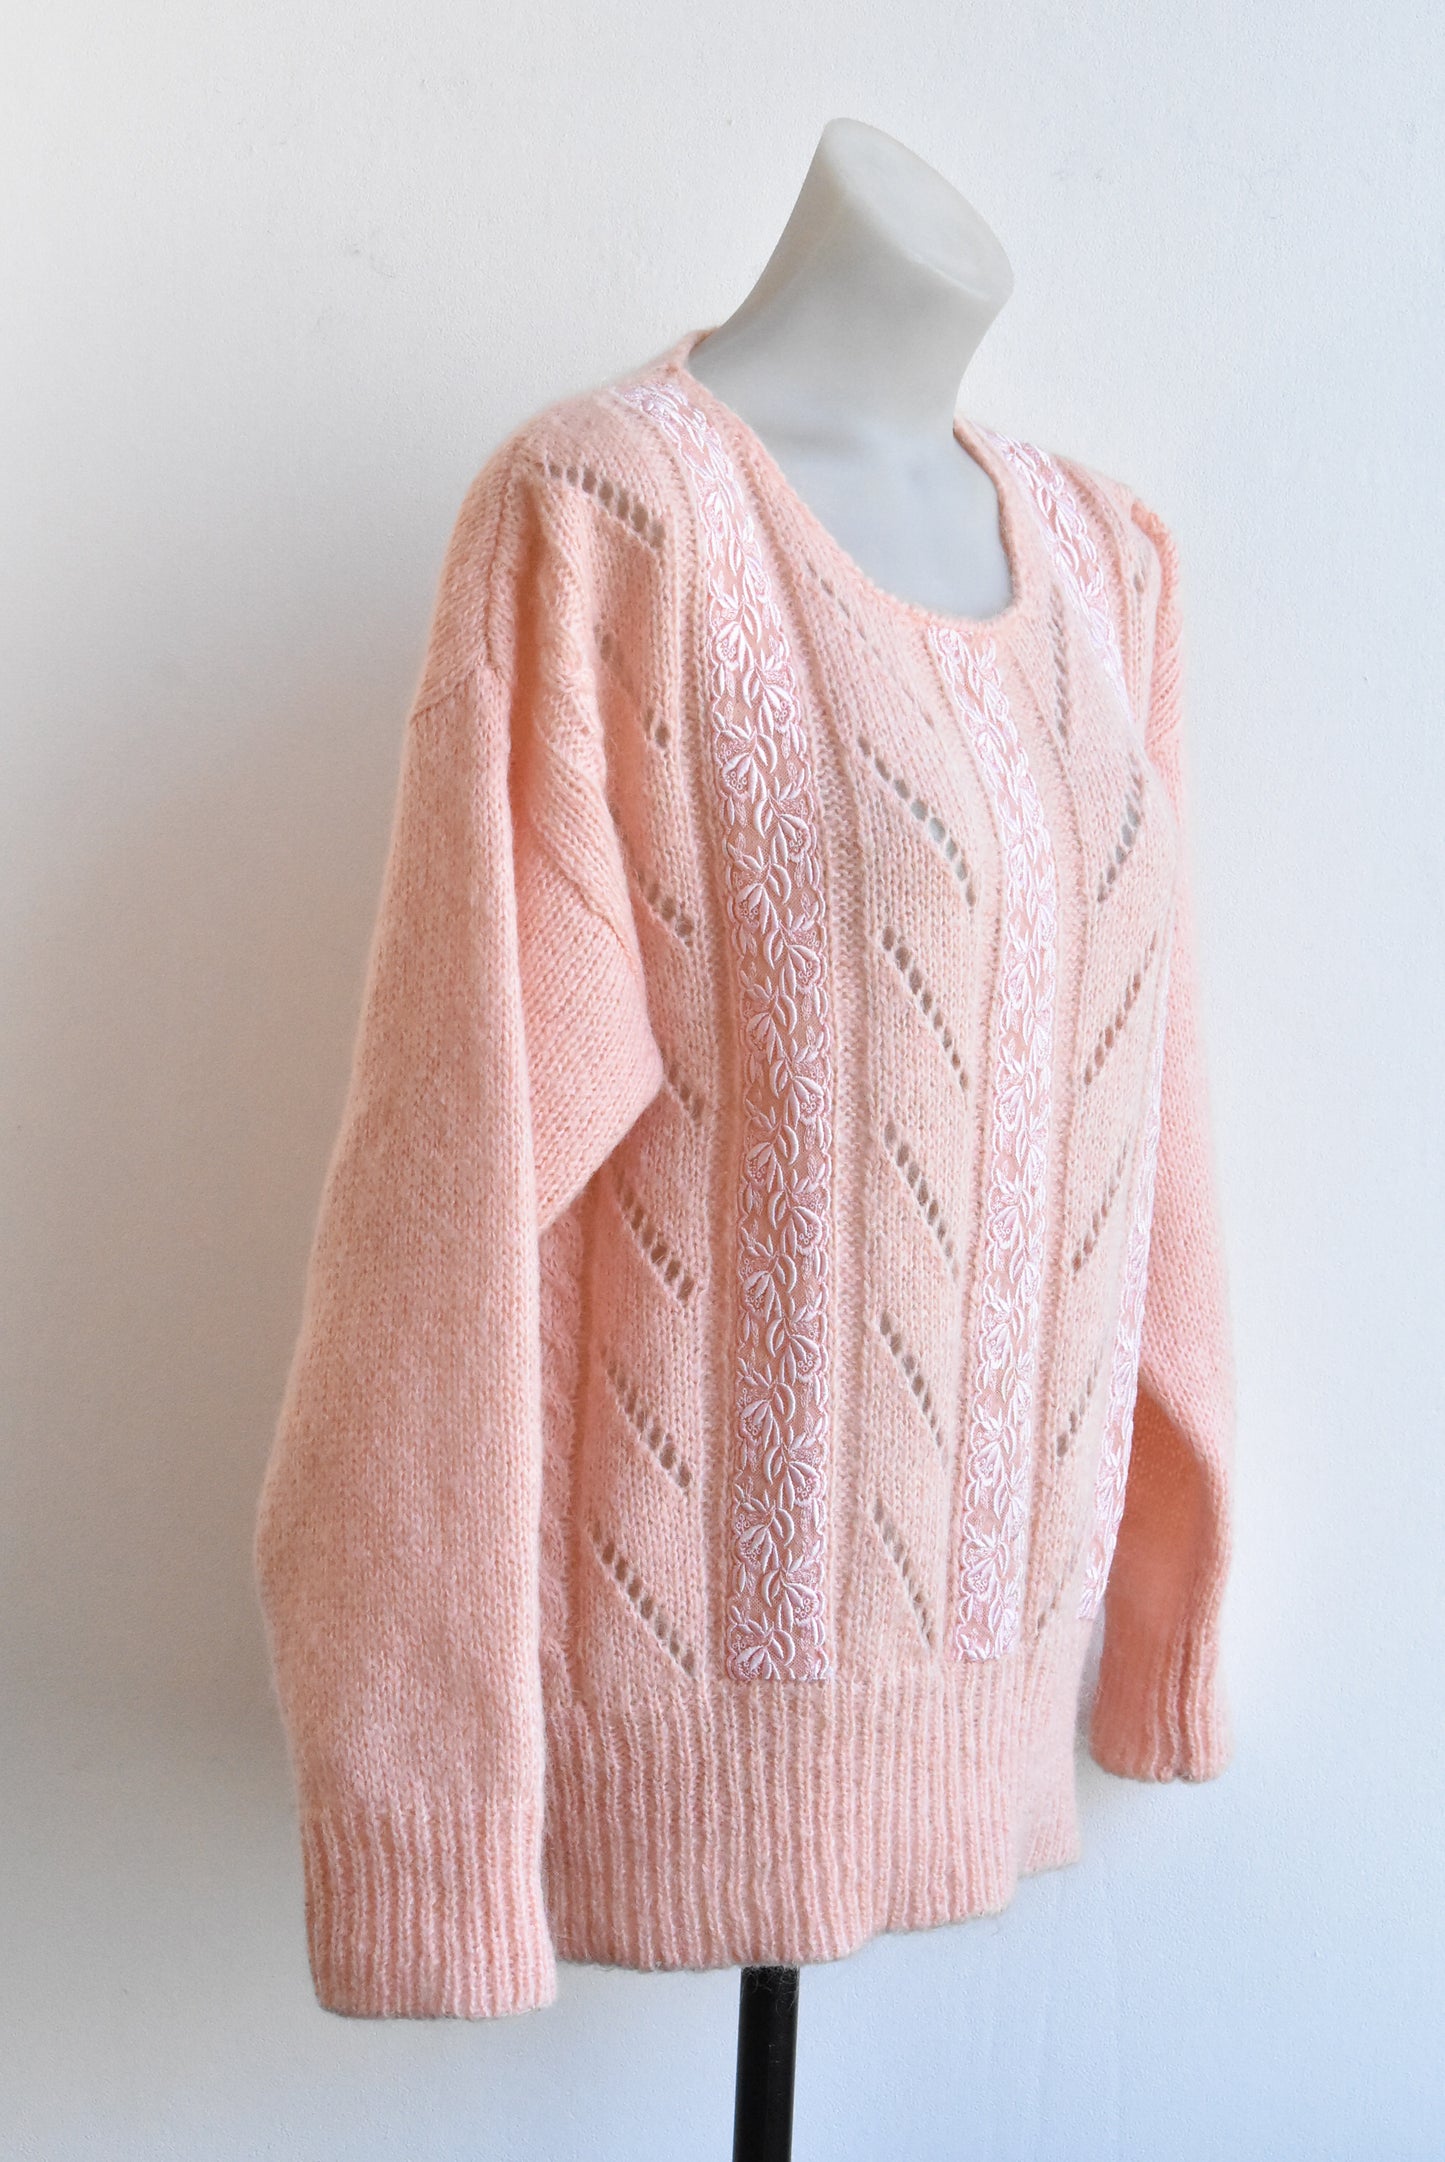 Nivo peach knit sweater with lace detailing, size L